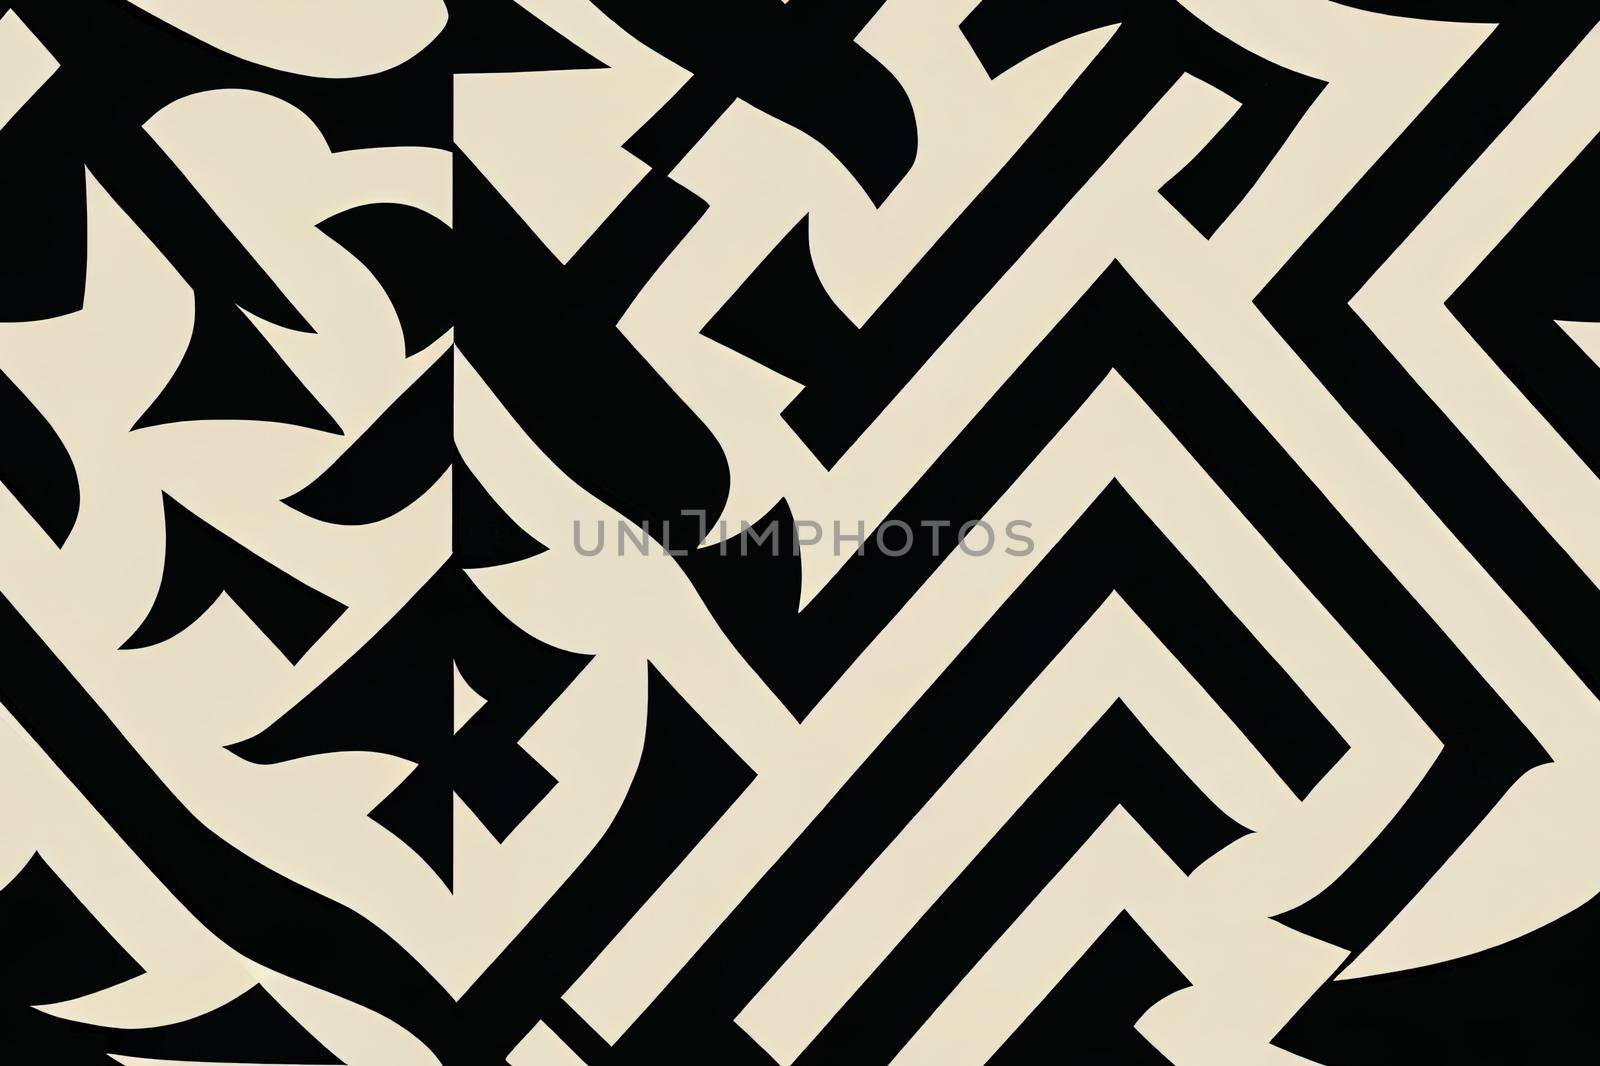 2d seamless pattern. Modern stylish texture. Repeating geometric tiles with volume diagonal zigzag